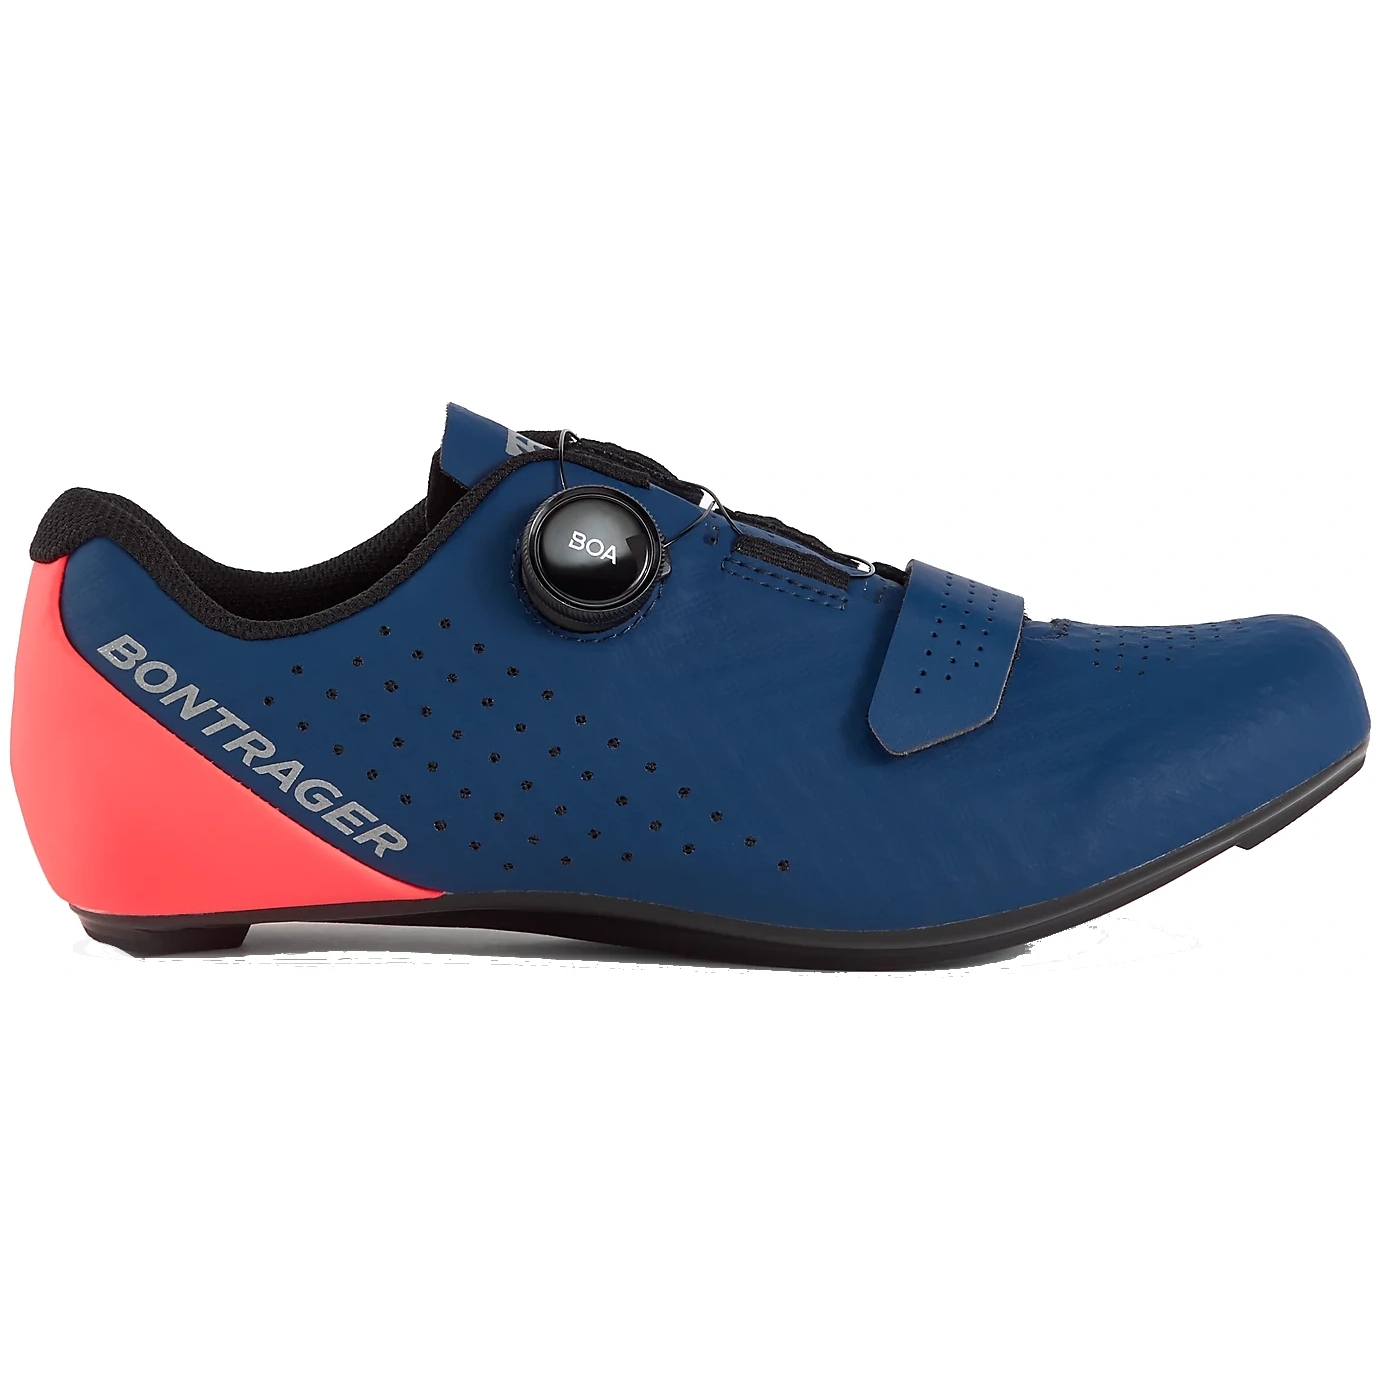 Picture of Bontrager Circuit Road Bike Shoe - nautical navy / radioactive coral